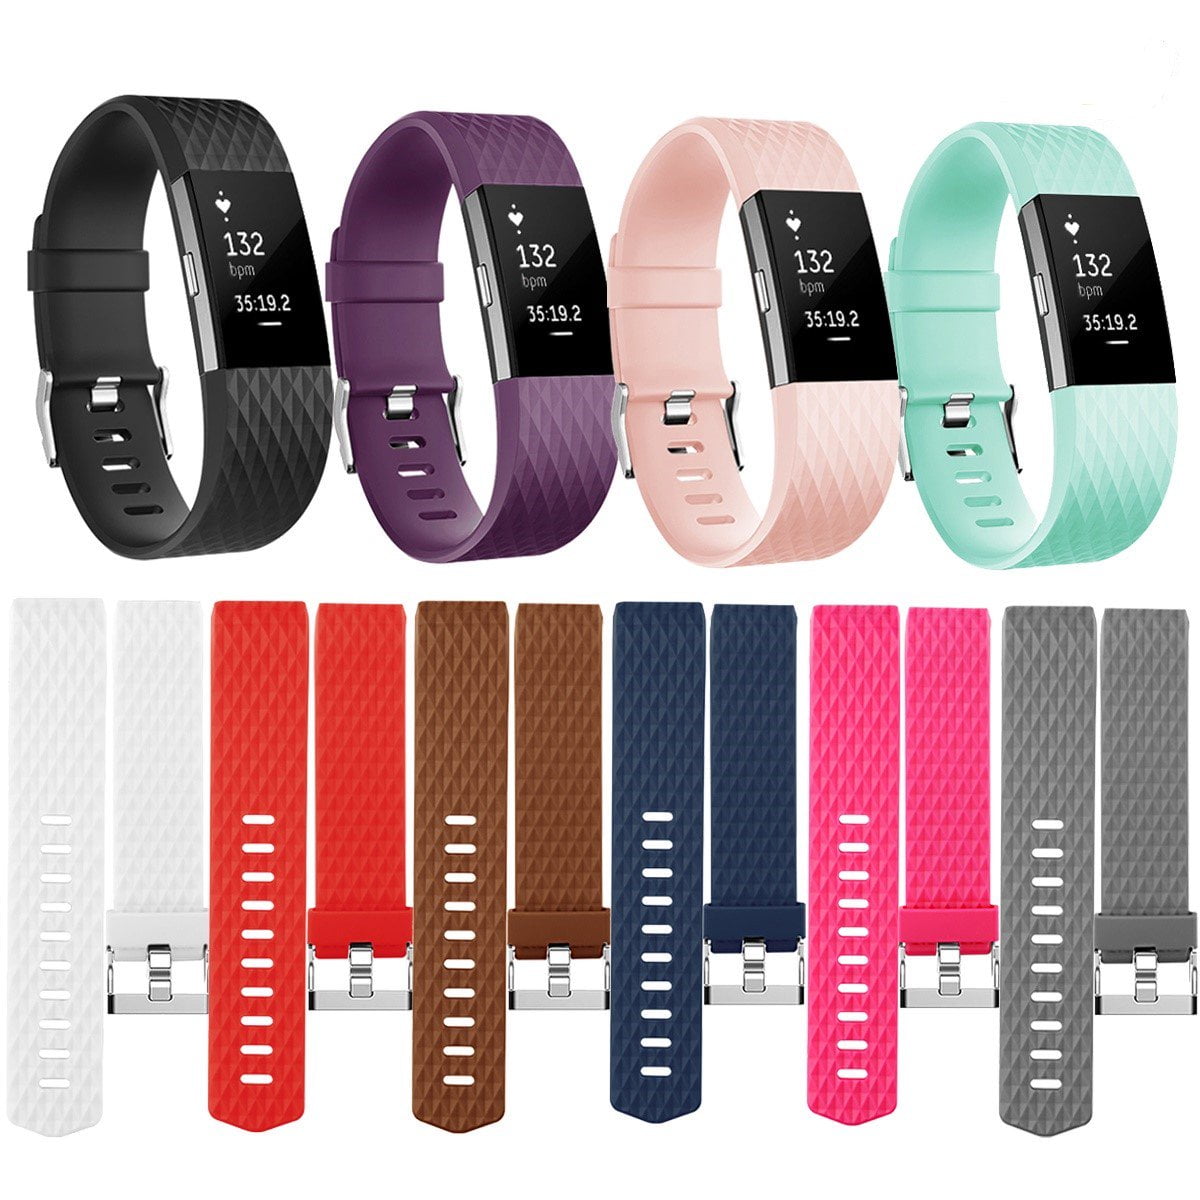 10 Pack Replacement Silicone Bracelet Band Strap Wristband For Fitbit CHARGE 2 